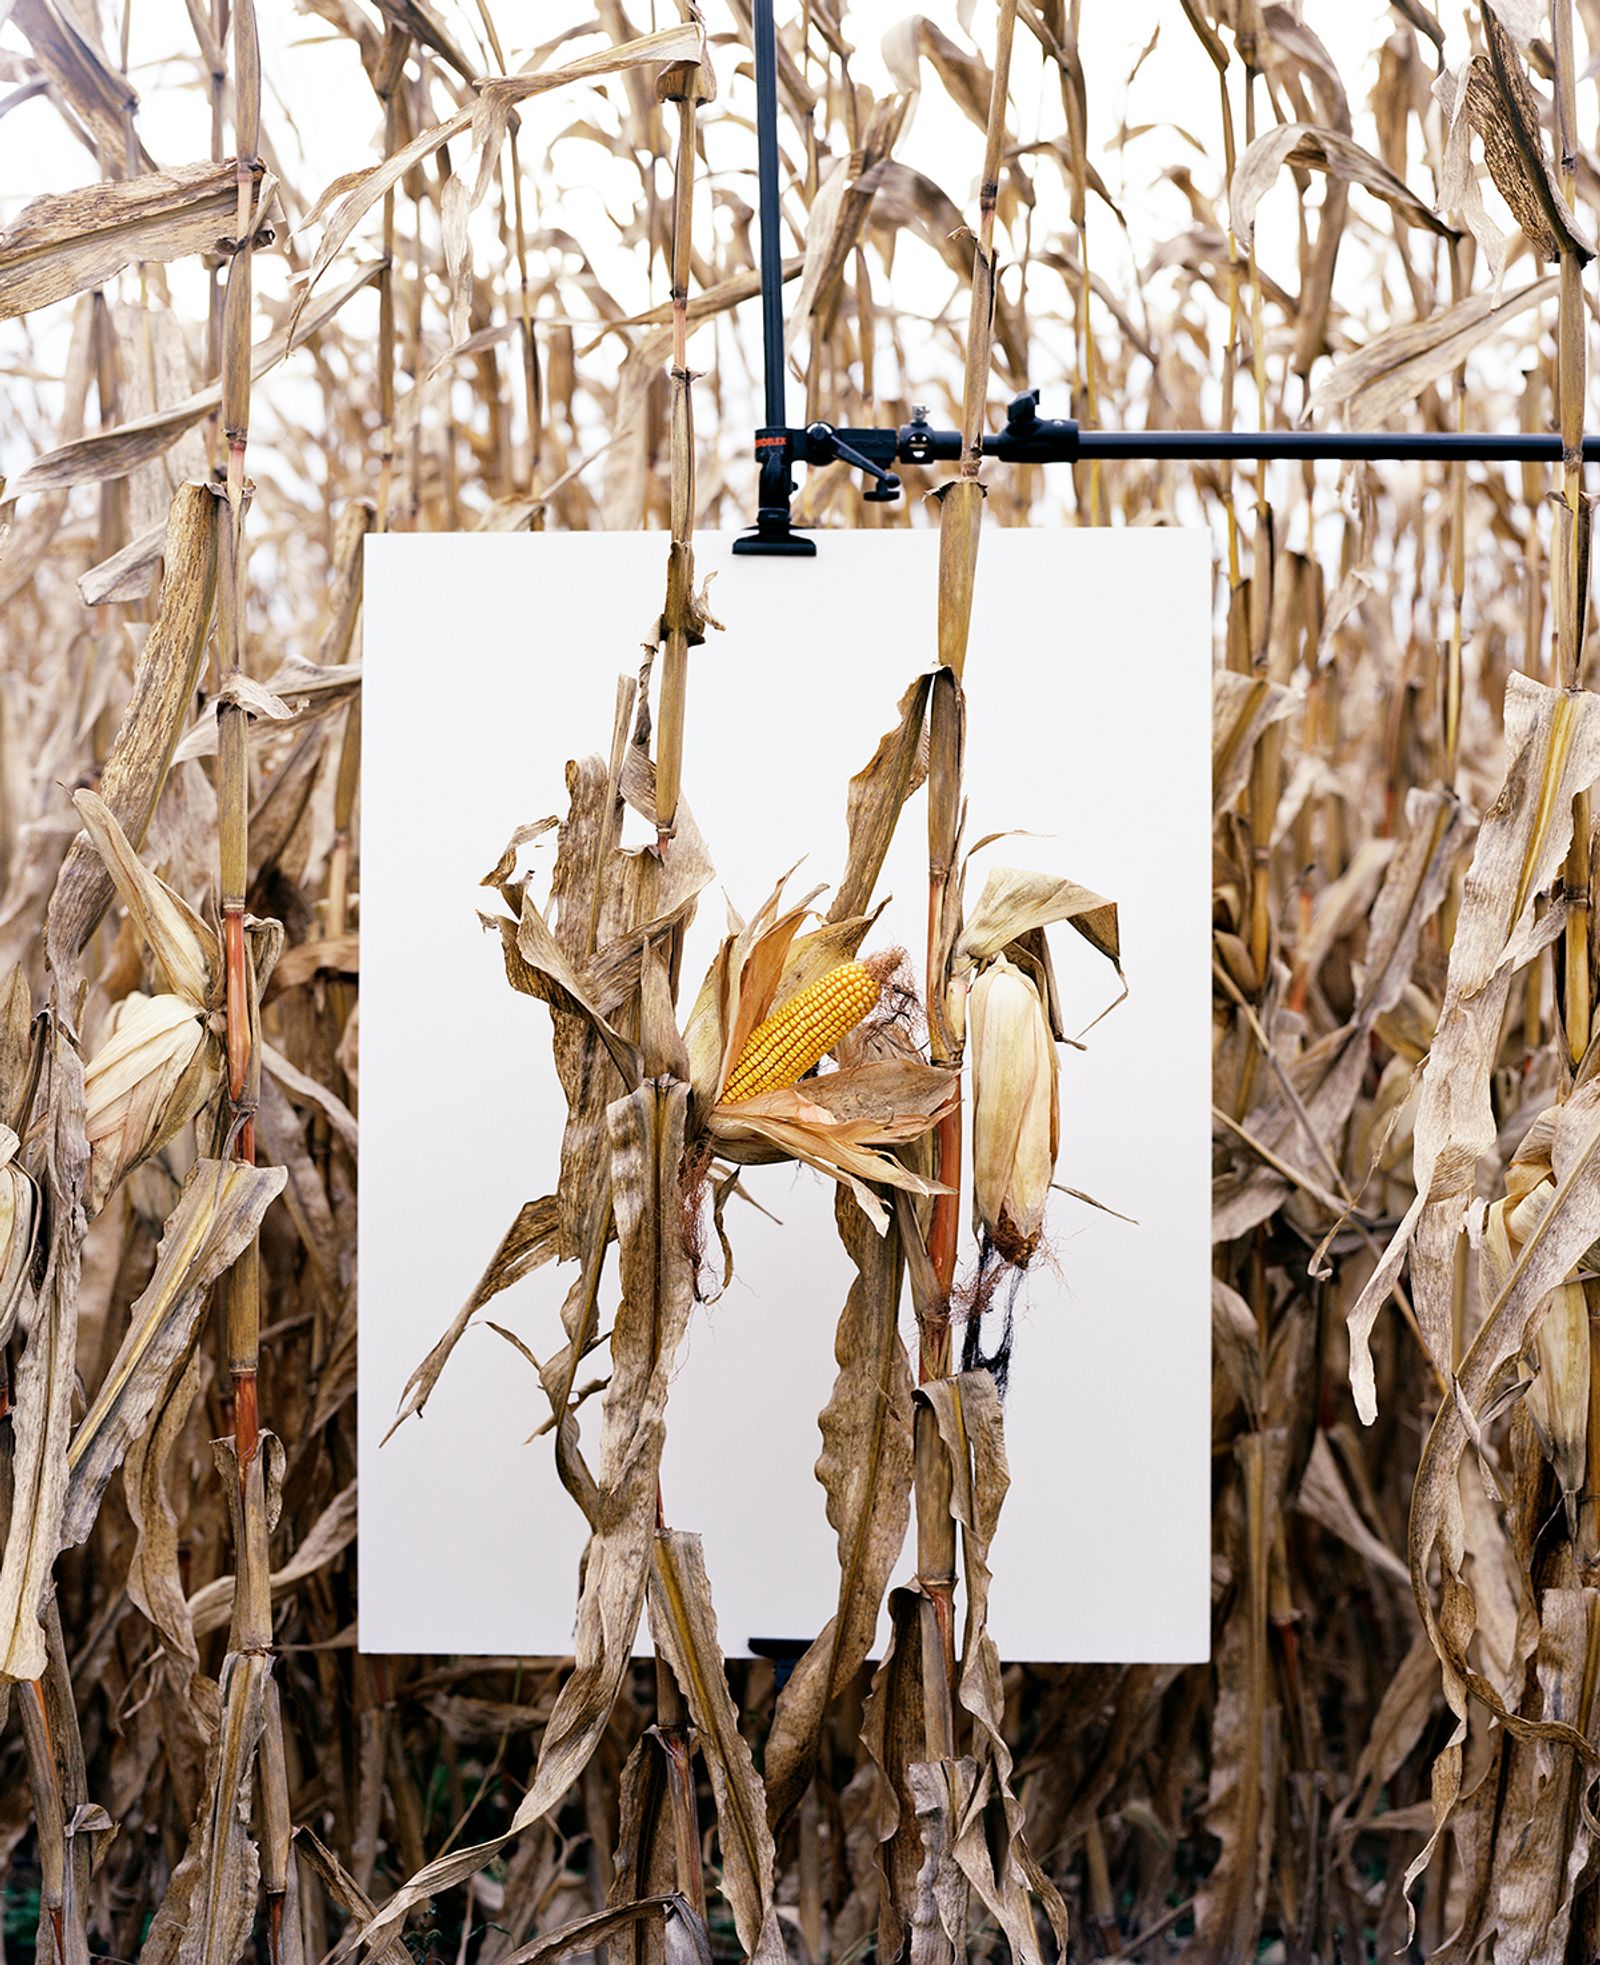 © Mathieu Asselin - Image from the Monsanto: A Photographic Investigation photography project